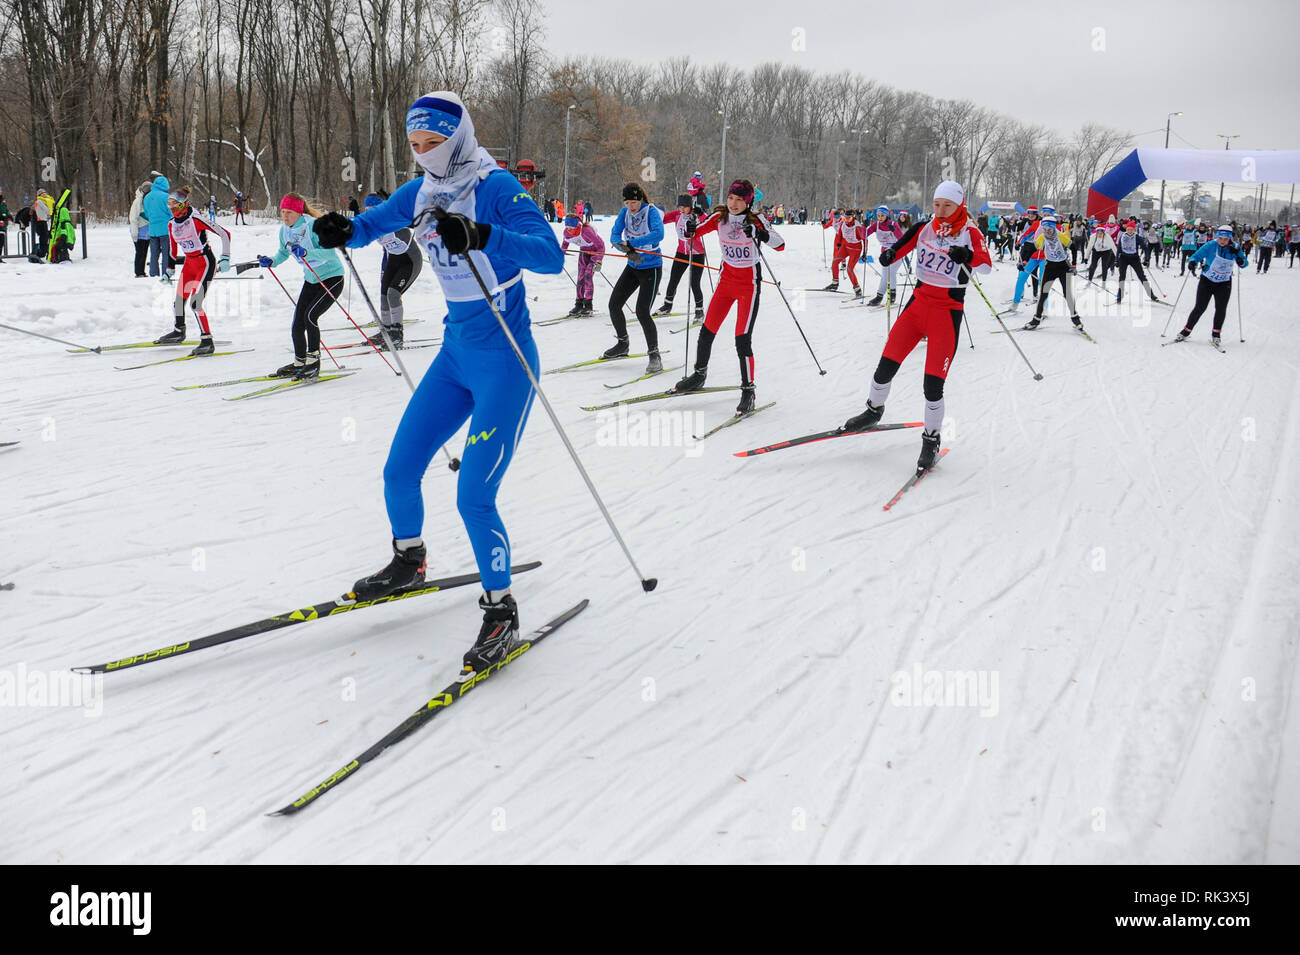 Tambov, Tambov region, Russia. 9th Feb, 2019. February 9, 2019, in the Park '' Friendship ''Tambov (Russia), held XXXVII all-Russian ski race''Ski track of Russia''. It was attended by about 6,000 residents of the Tambov region. The youngest participant was three years and six months old, and the oldest was over 80 years old. In the photo - Participants of the all-Russian ski race ''Ski track of Russia'' in Tambov (Russia) on the ski track. Credit: Demian Stringer/ZUMA Wire/Alamy Live News Stock Photo